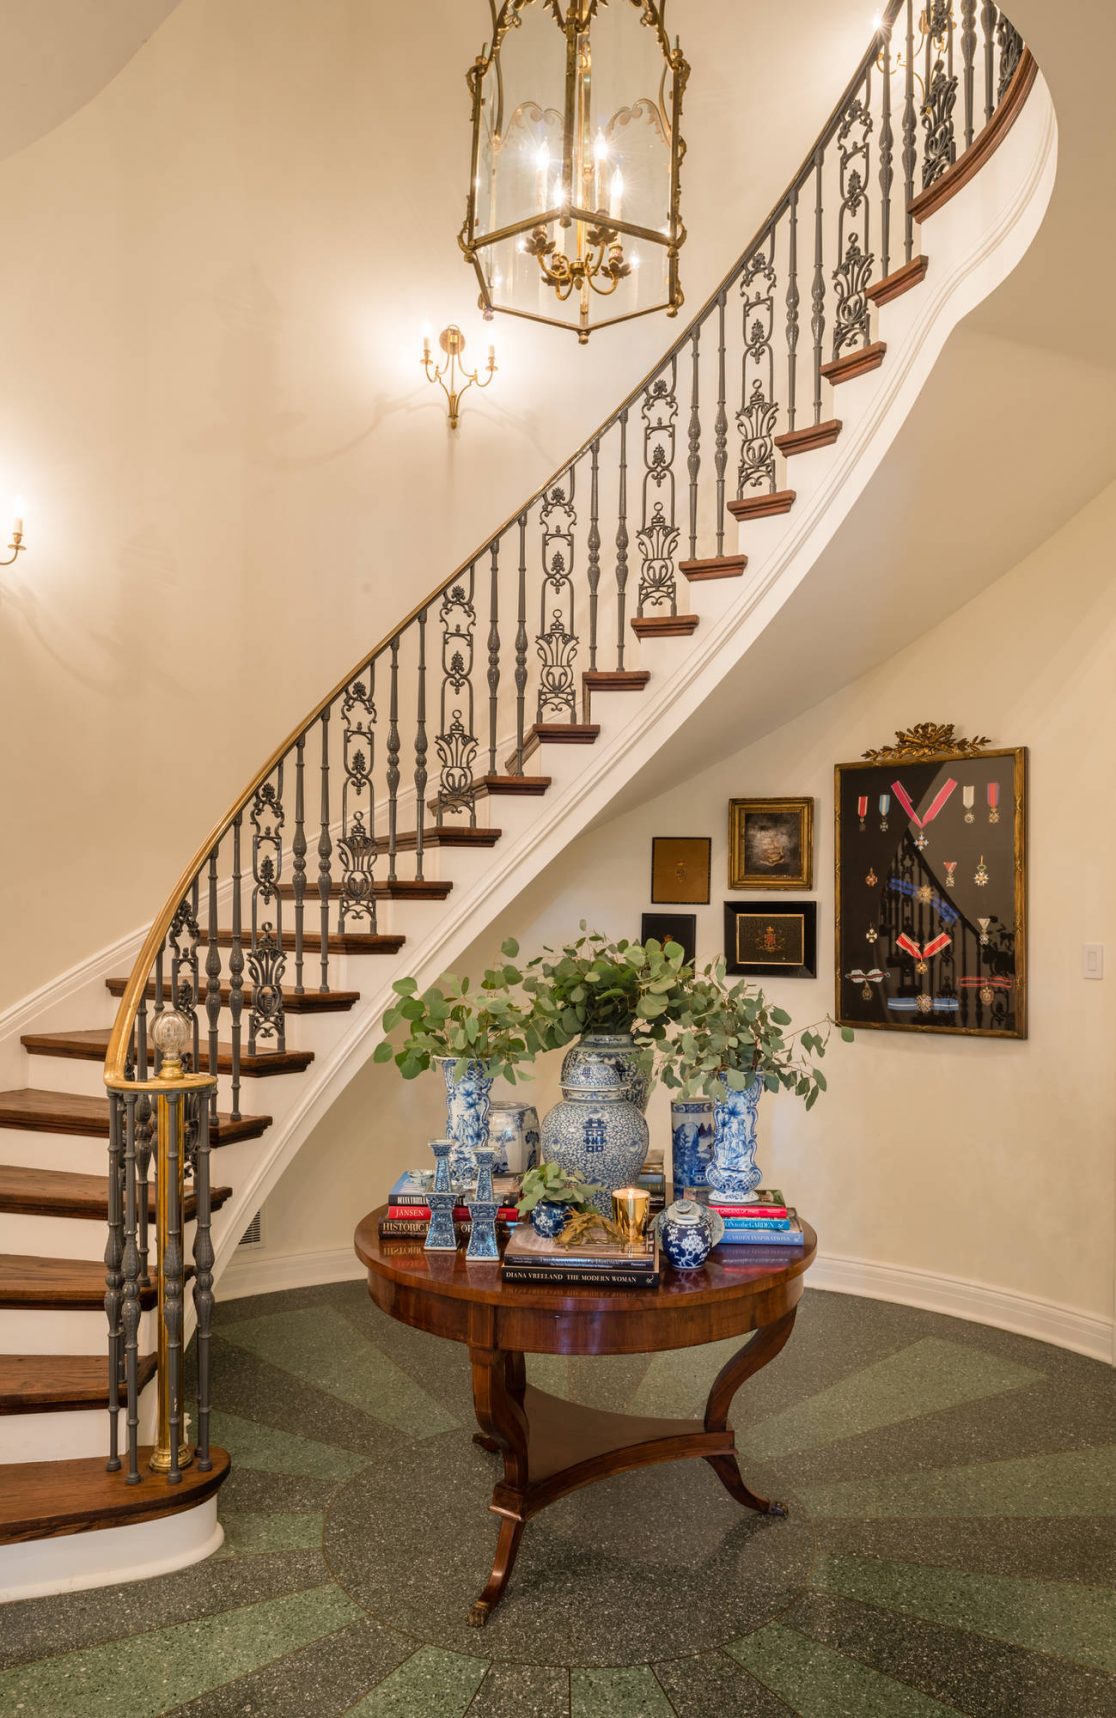 Traditional Estate Spiral Staircase